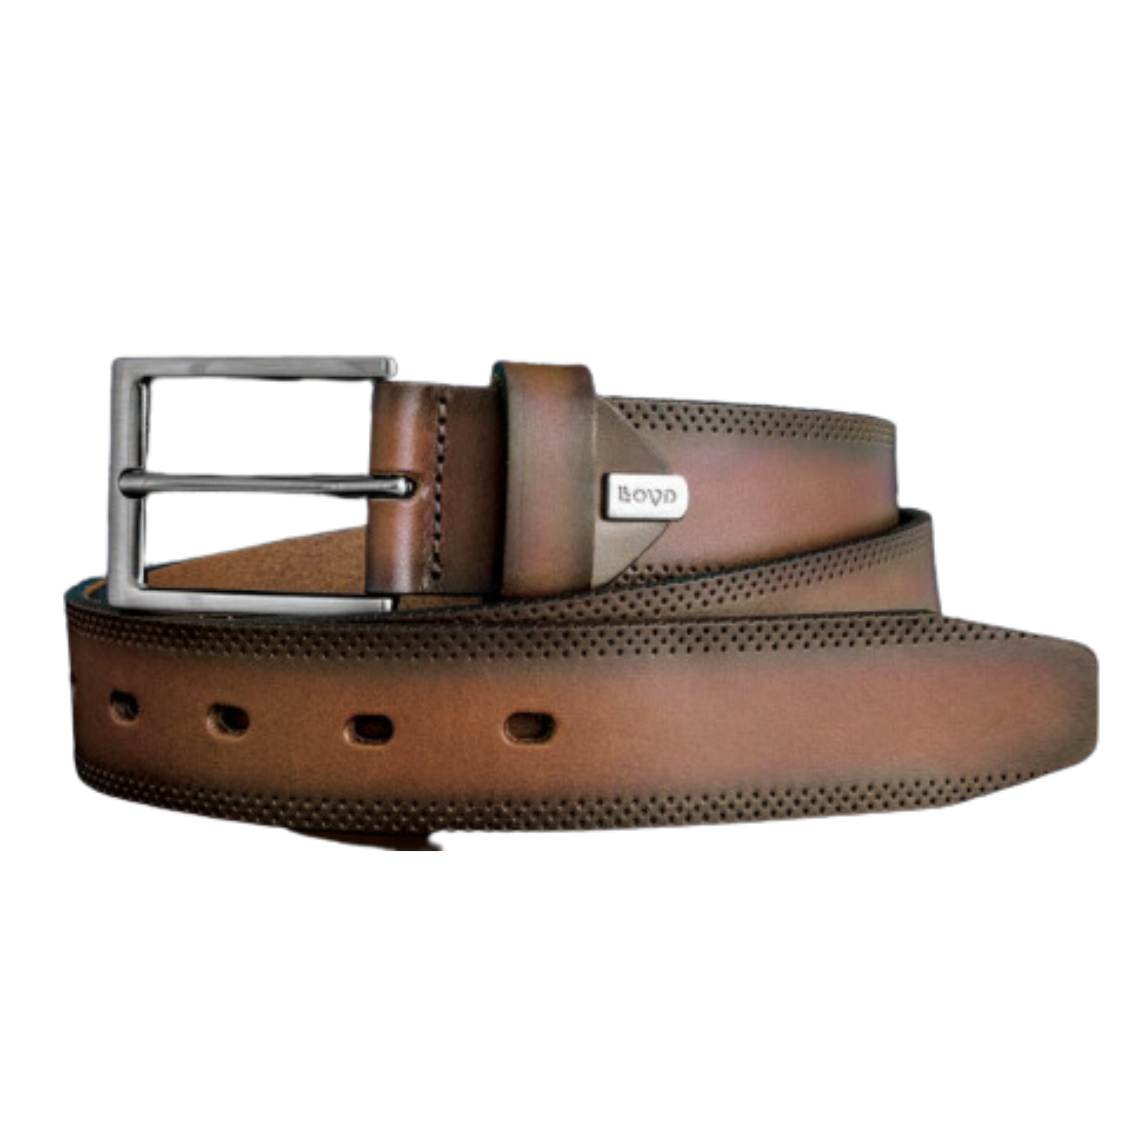 Embossed Fullgrain Leather belt with Brushed Edges